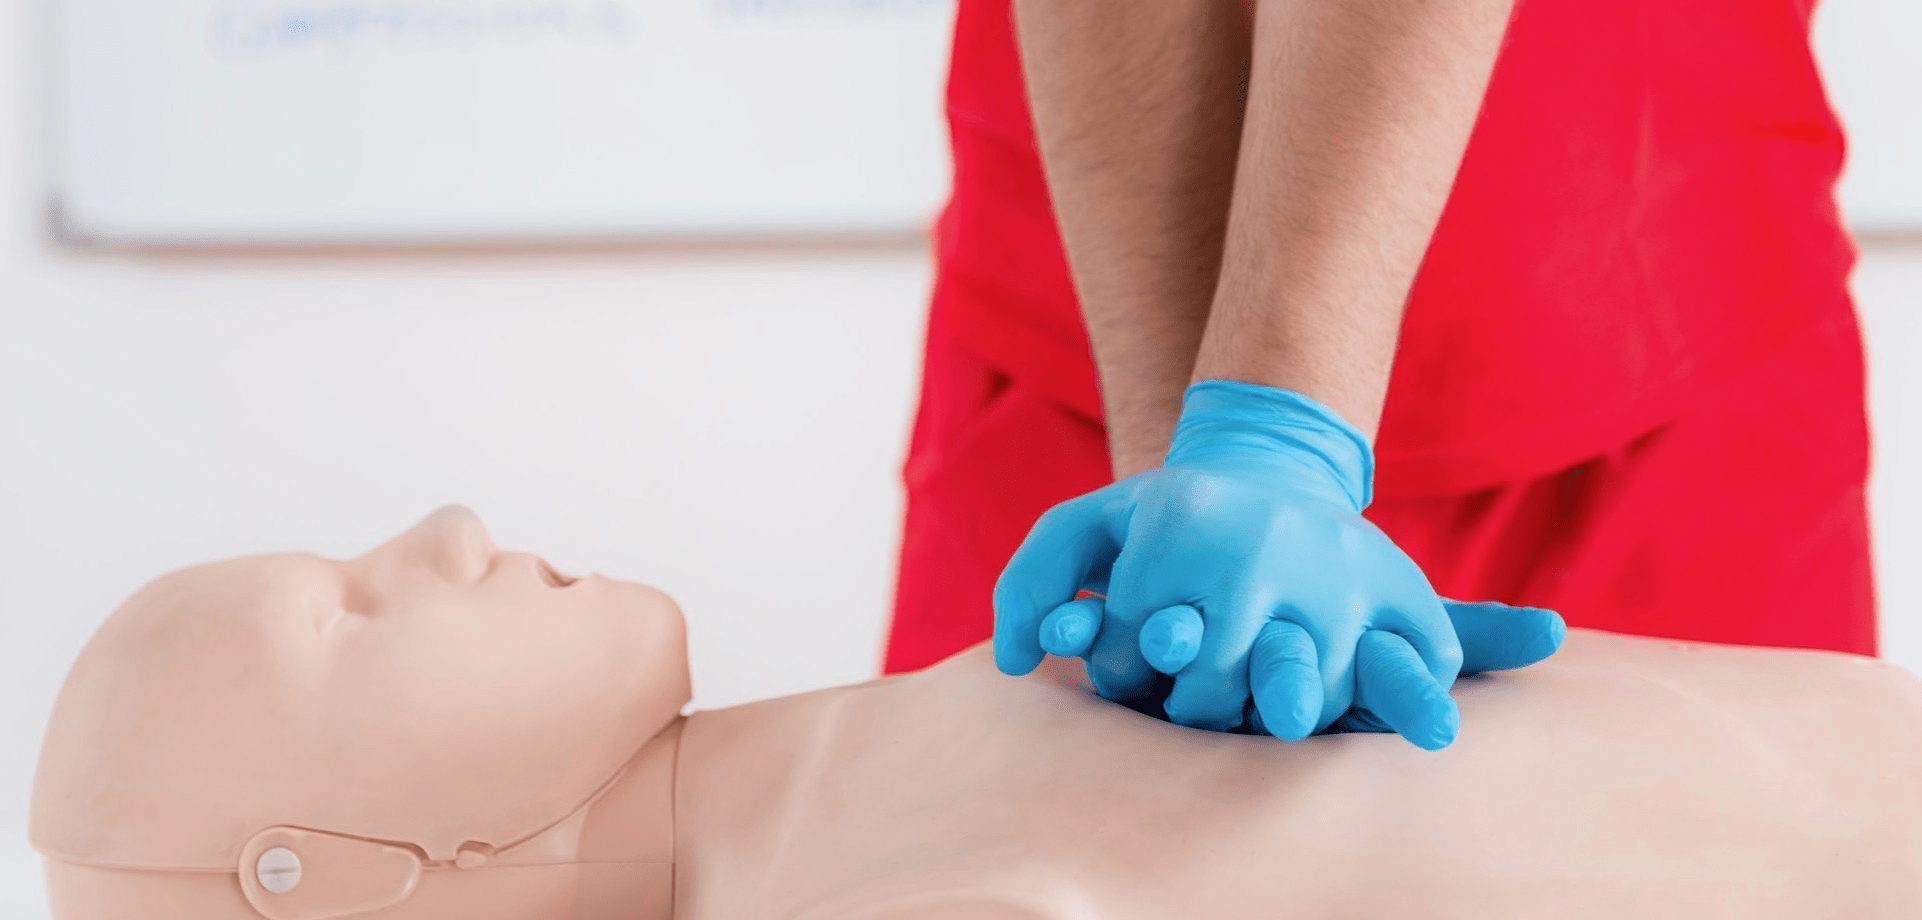 WCT FIRST AID COURSE | BLENDED LEARNING